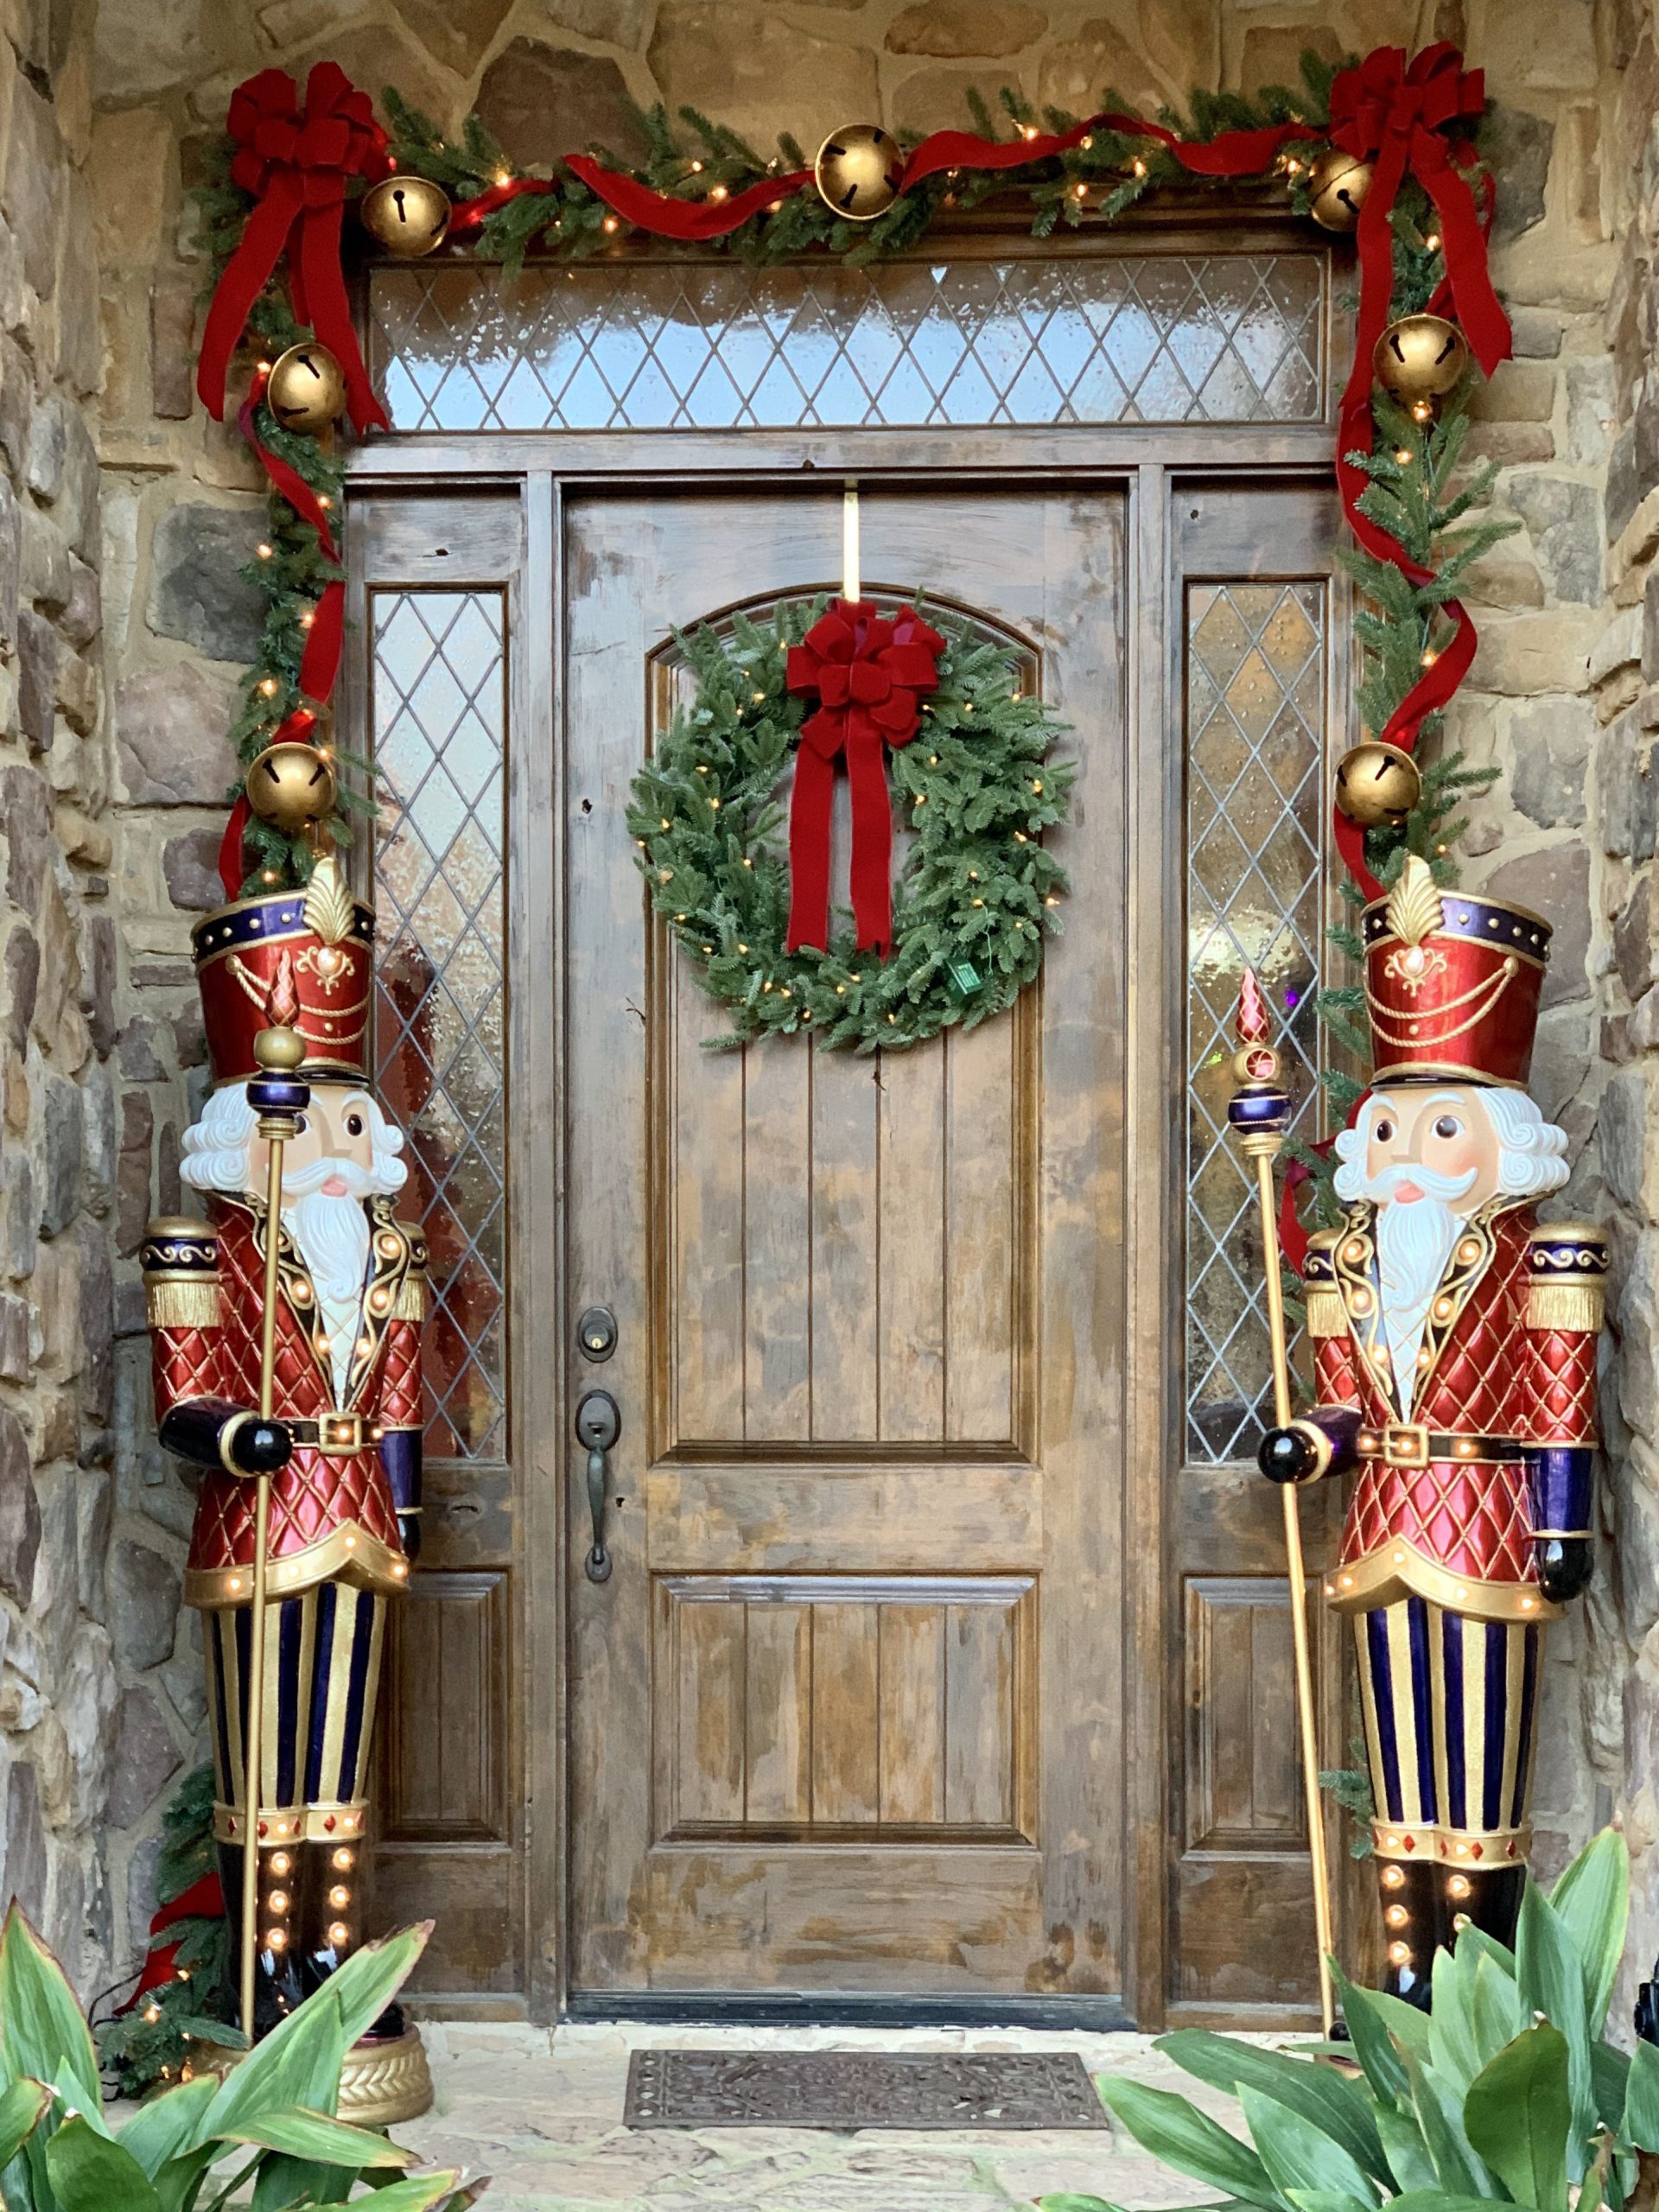 Christmas Nutcracker Soldiers on the Front Porch